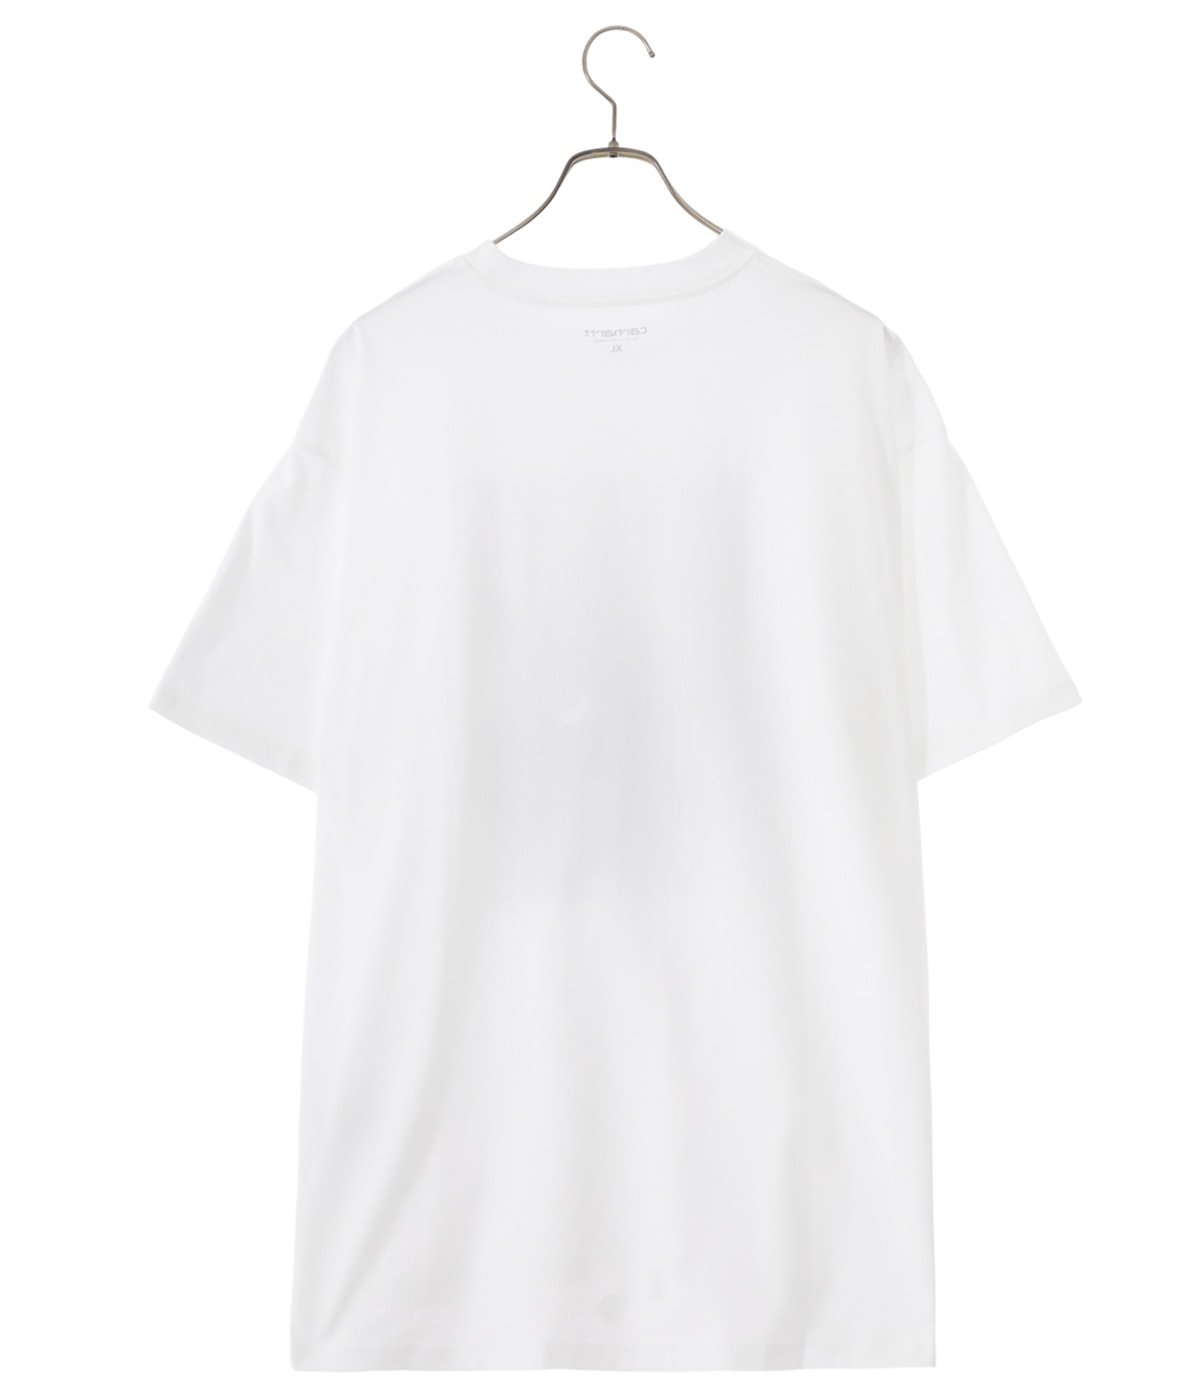 S/S ARCHIVE GIRLS T-SHIRT